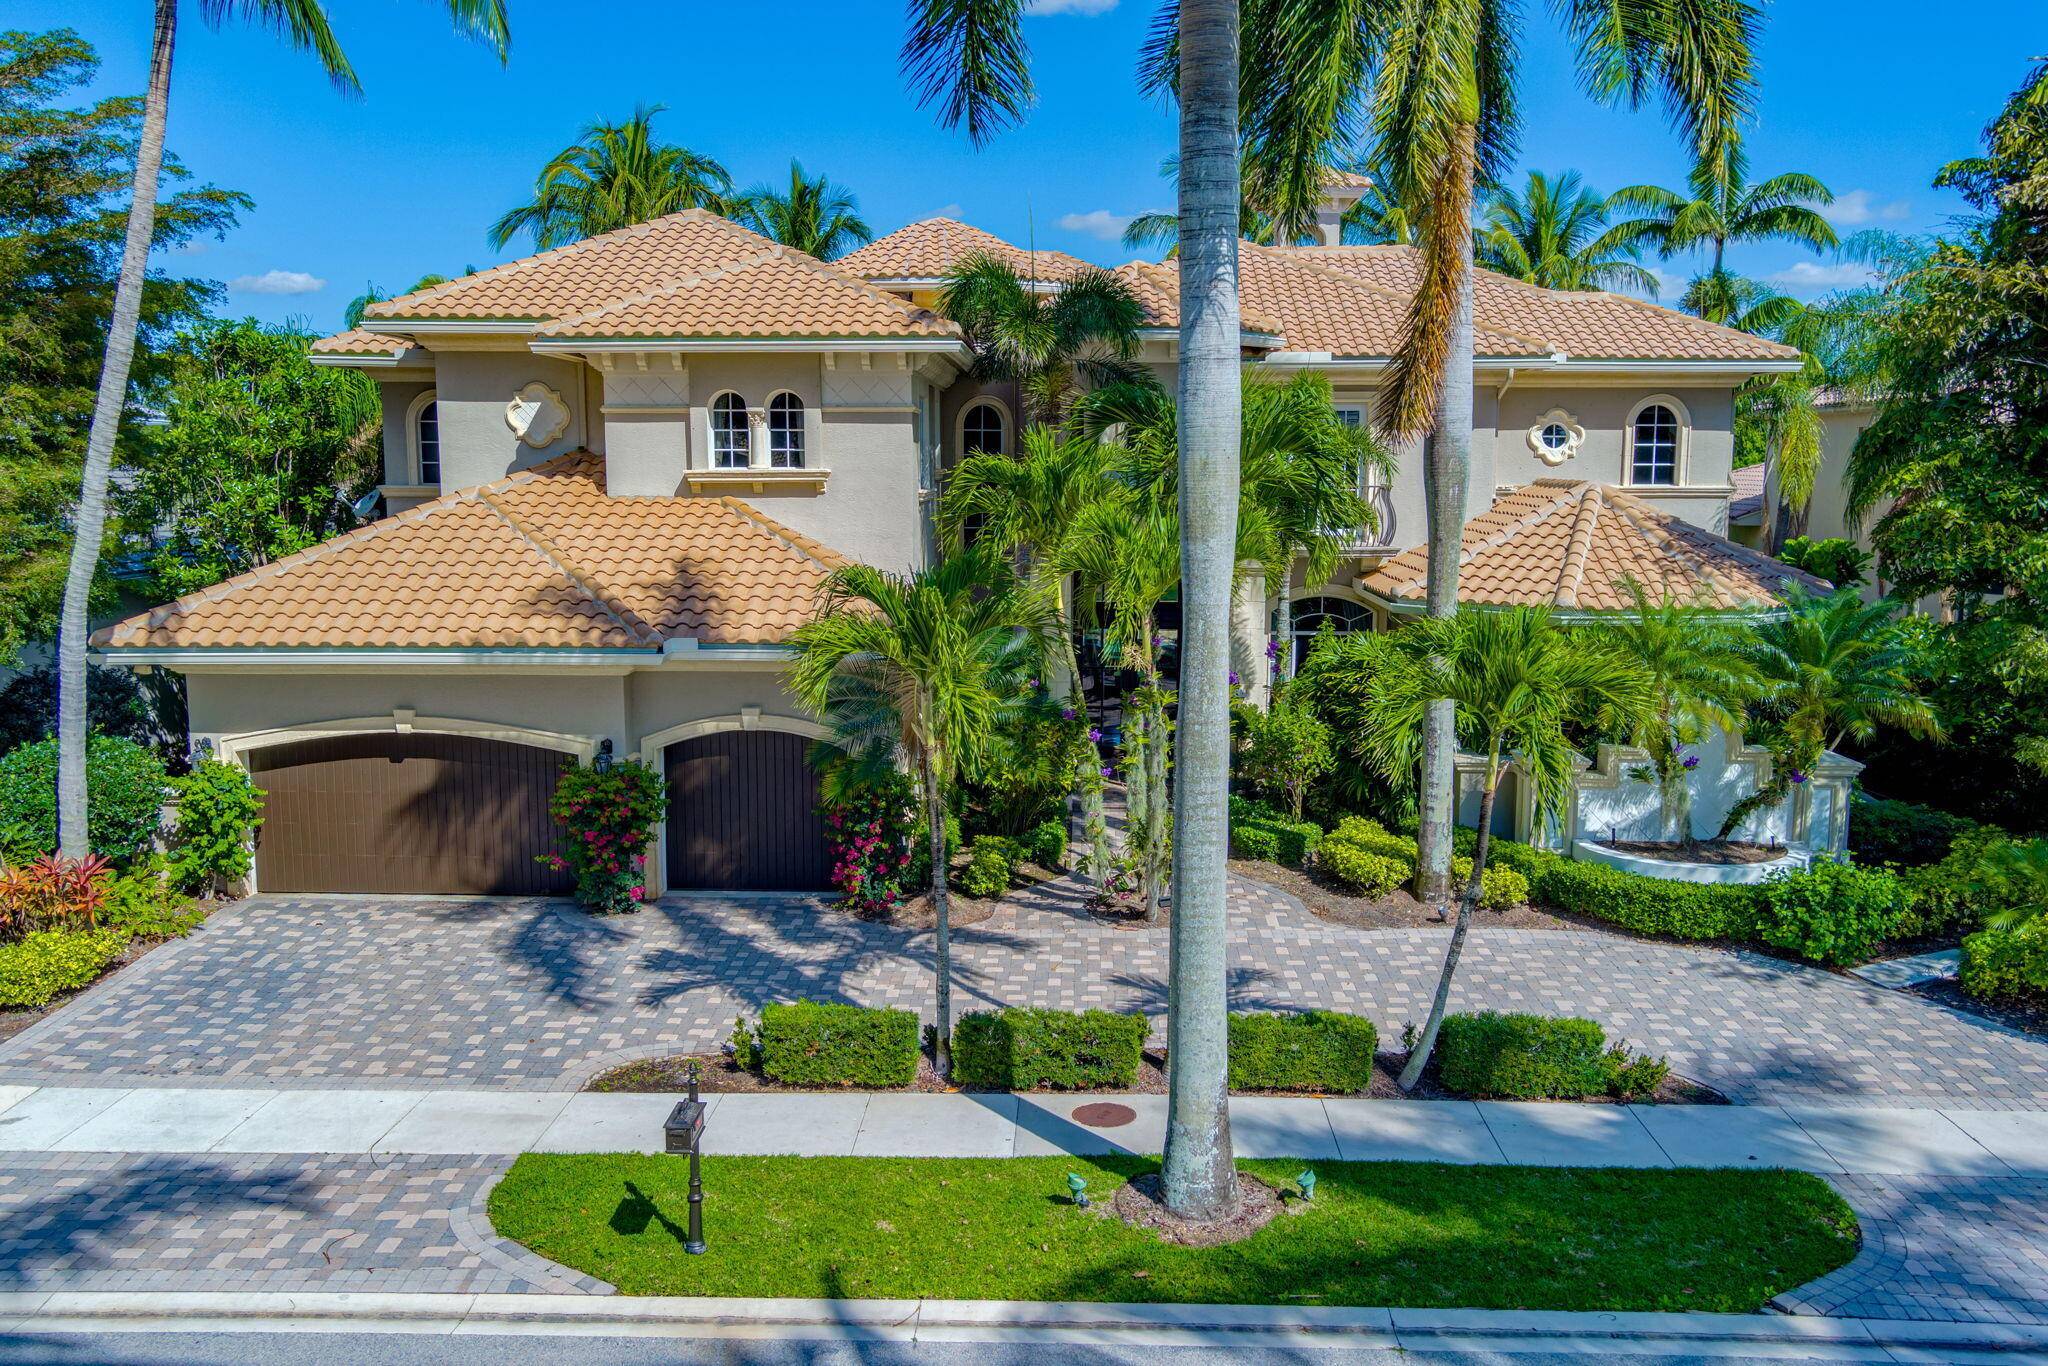 Welcome to 107 Villa Capri in The Country Club at Mirasol, a stunning Mediterranean style home boasting over 7100 sq ft of luxurious living space.